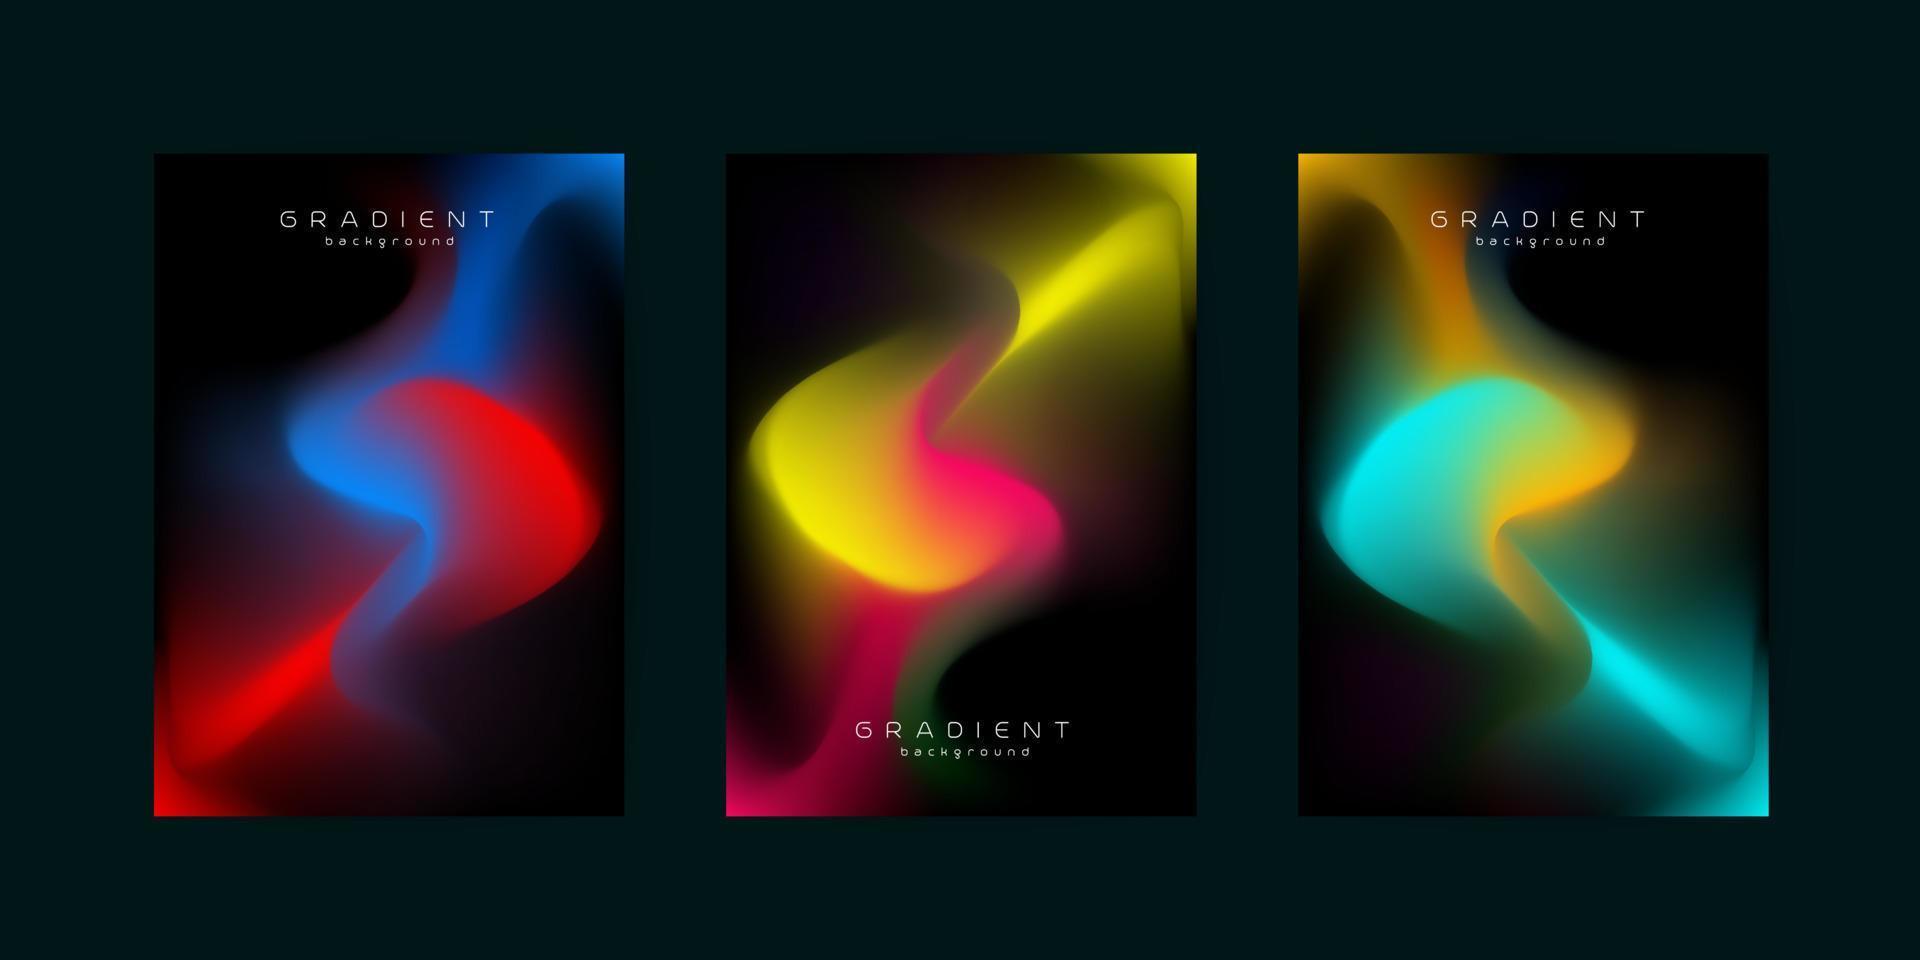 Dark red abstract pastel gradieent background design, Curved shapes patterns design element. Modern red and blue gradient flowing wave lines vector